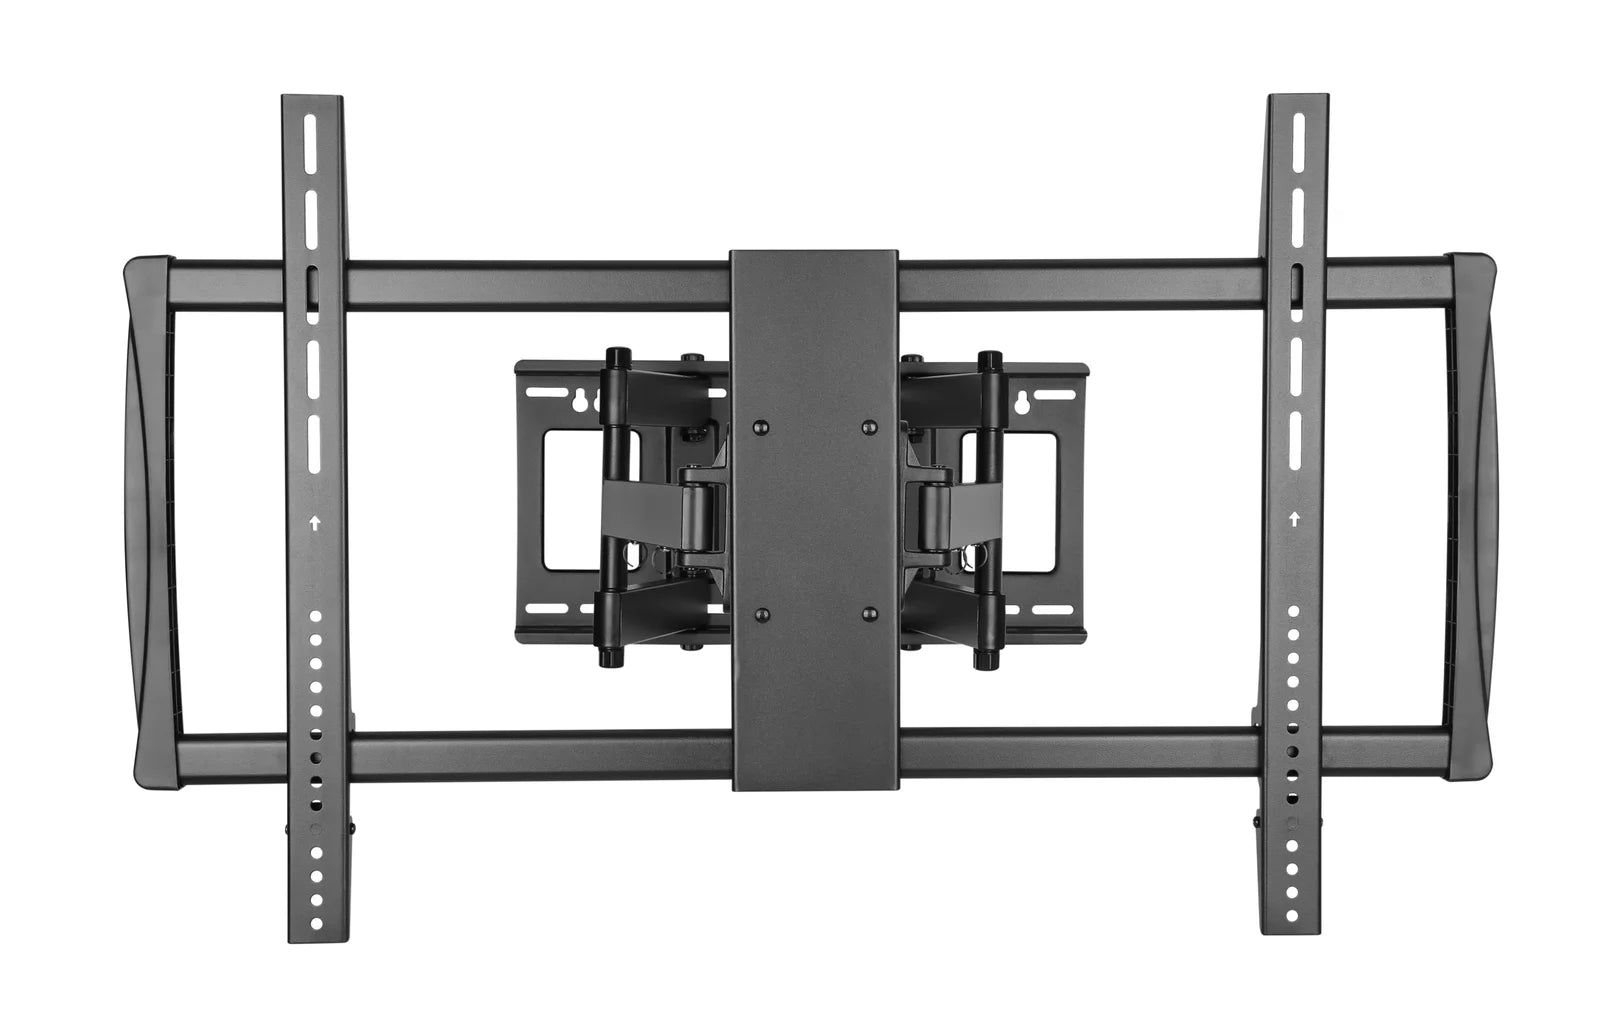 SkillTech - SH 960P - X-Large Heavy-Duty Full Motion Curved & Flat Panel Tv Wall Mount